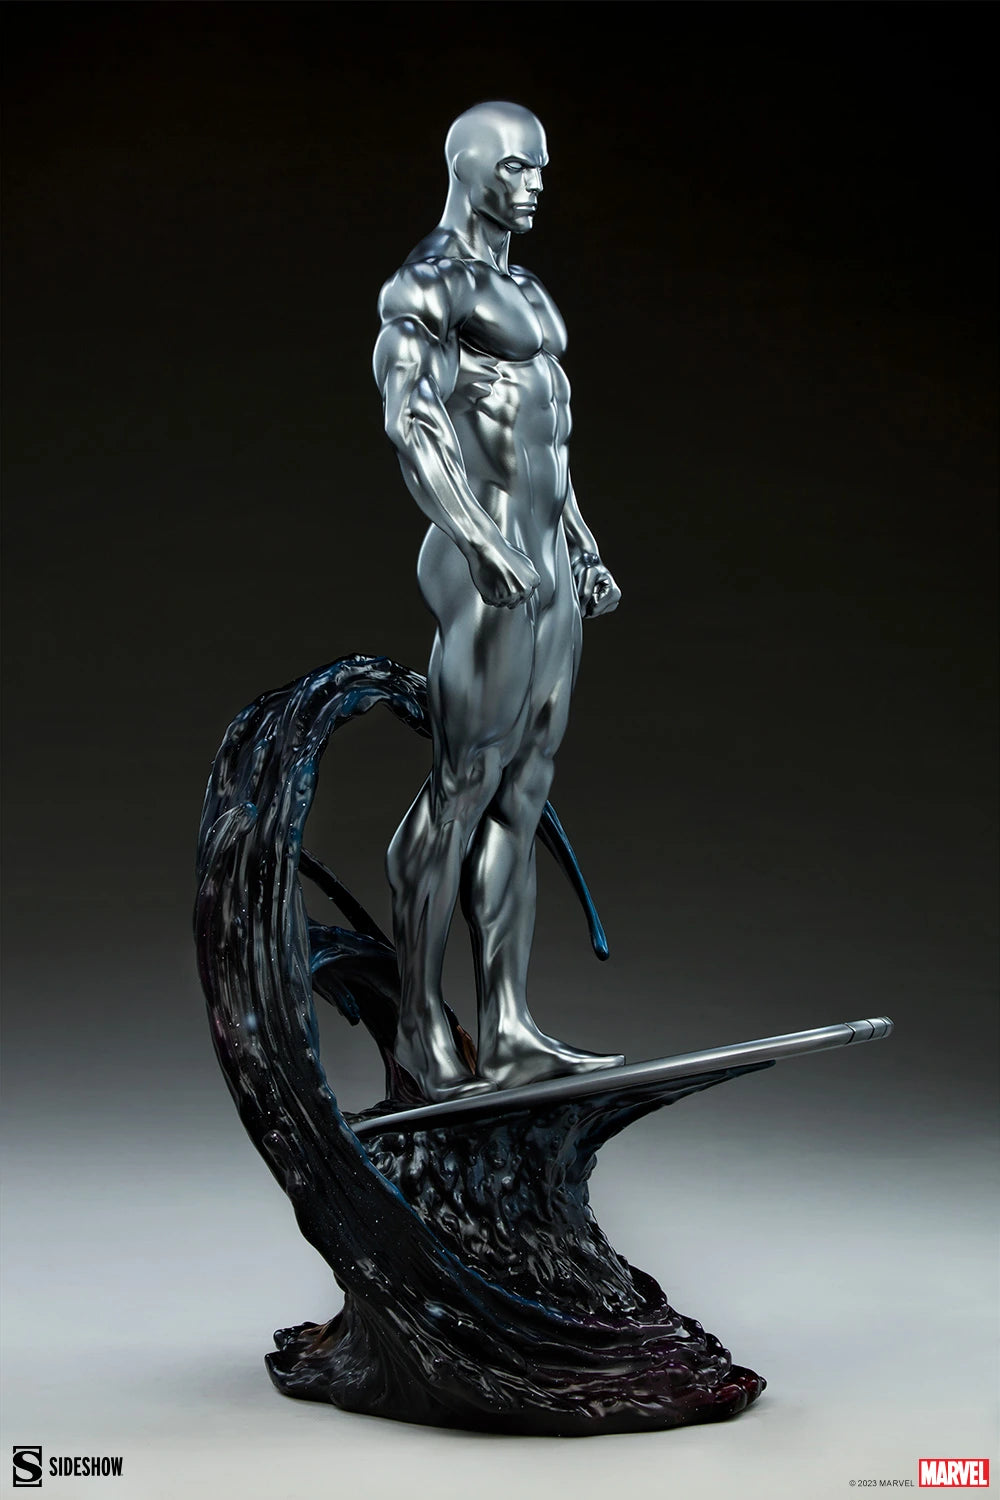 Sideshow Silver Surfer Maquette Limited Edition Figure